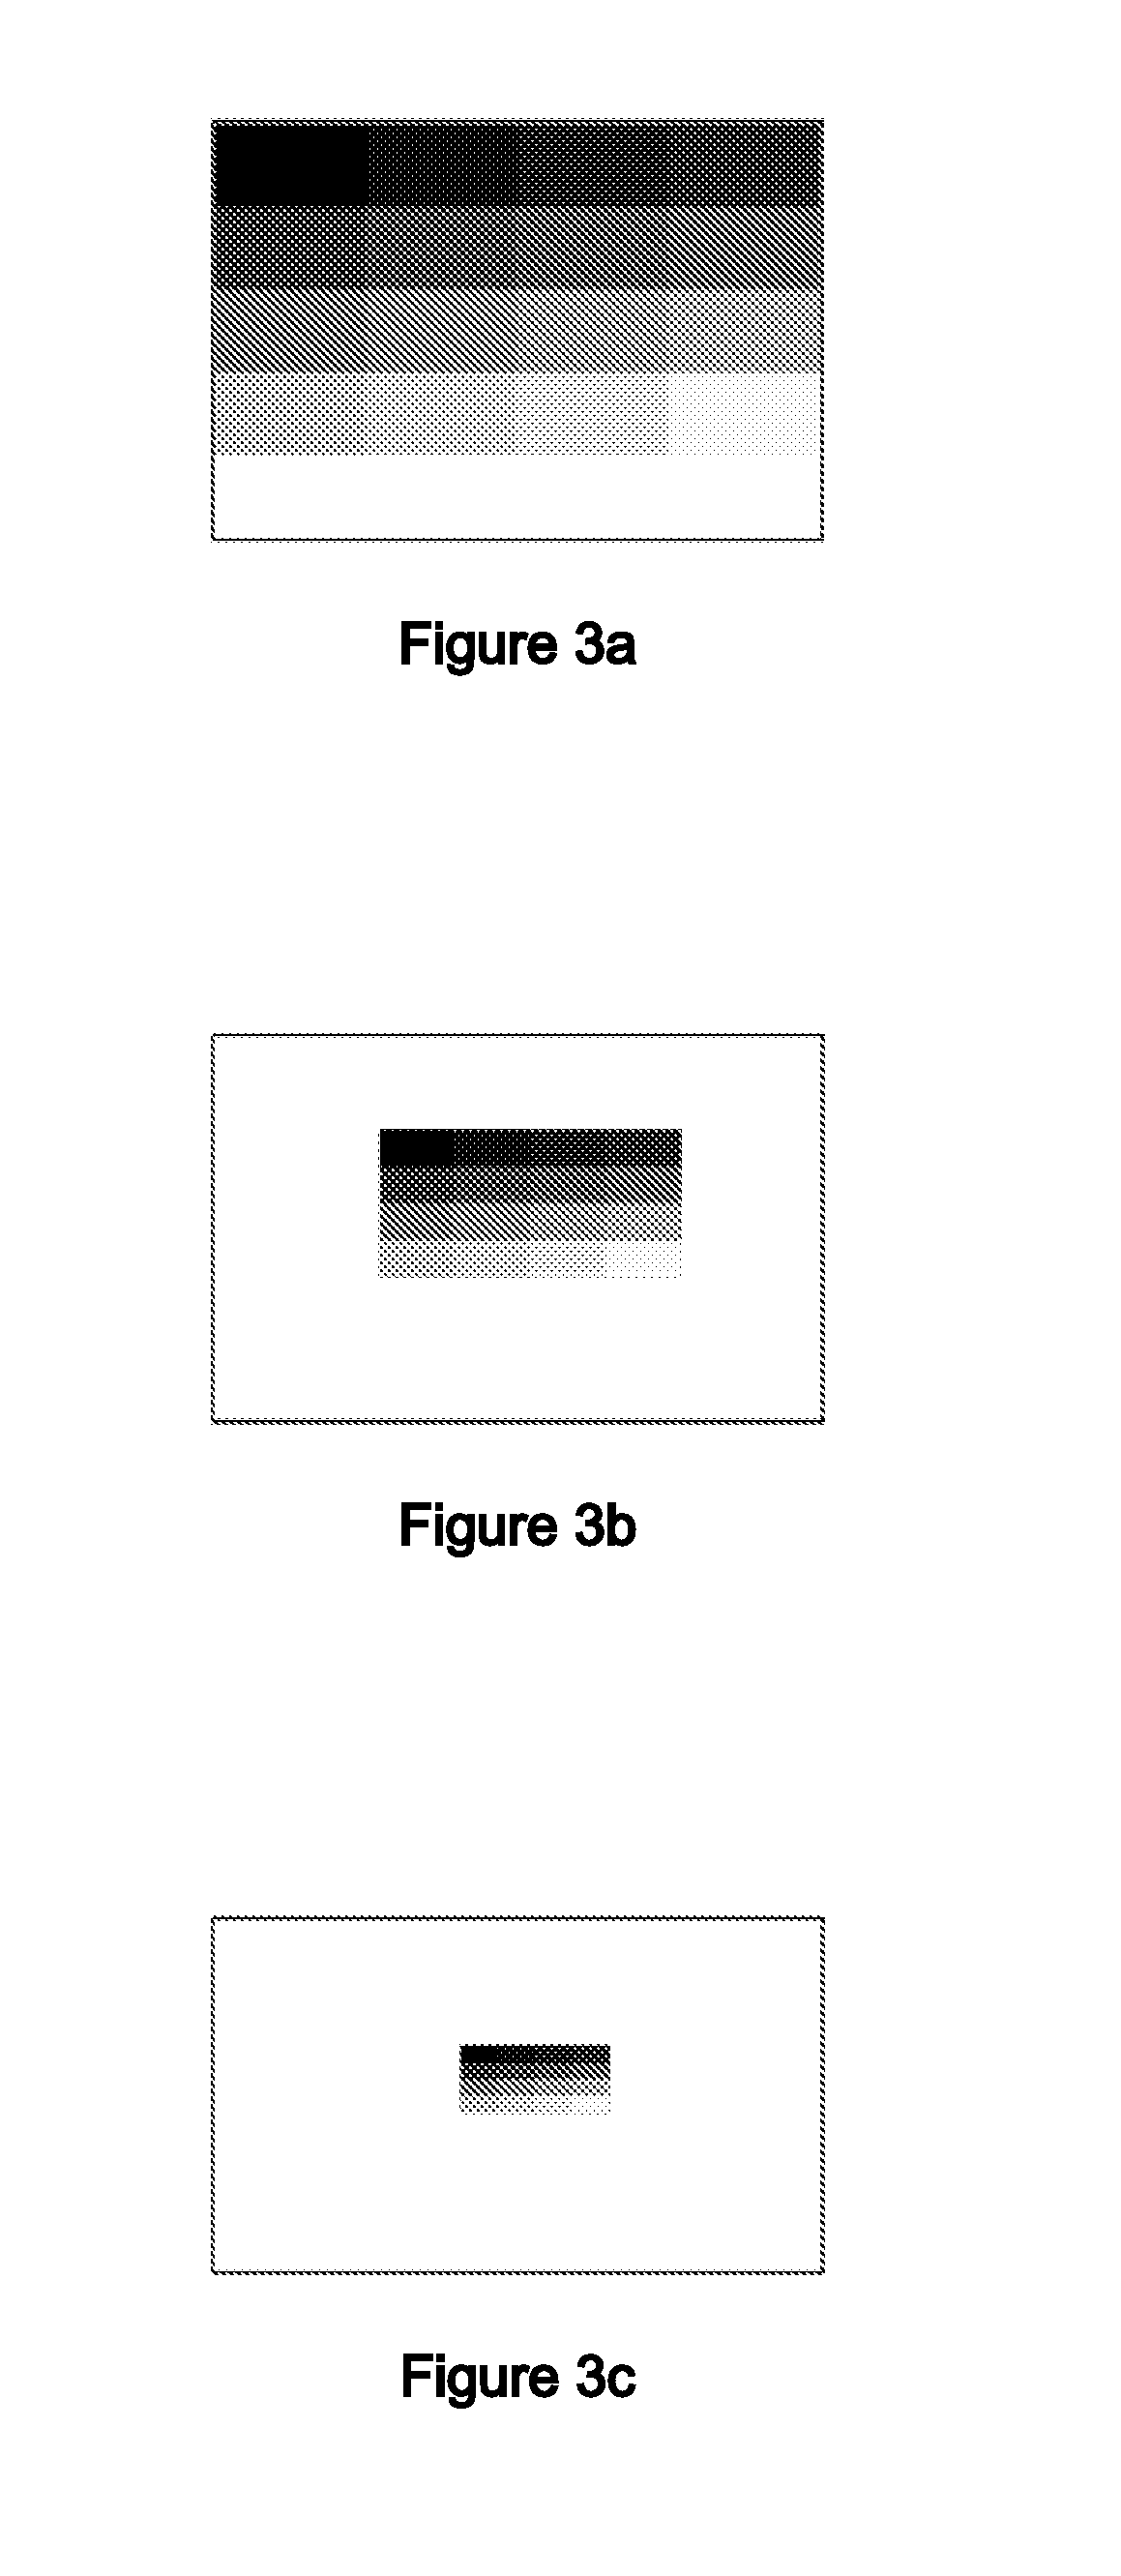 Method for Collecting Full Grayscale Data of LCD Based On CCD Camera